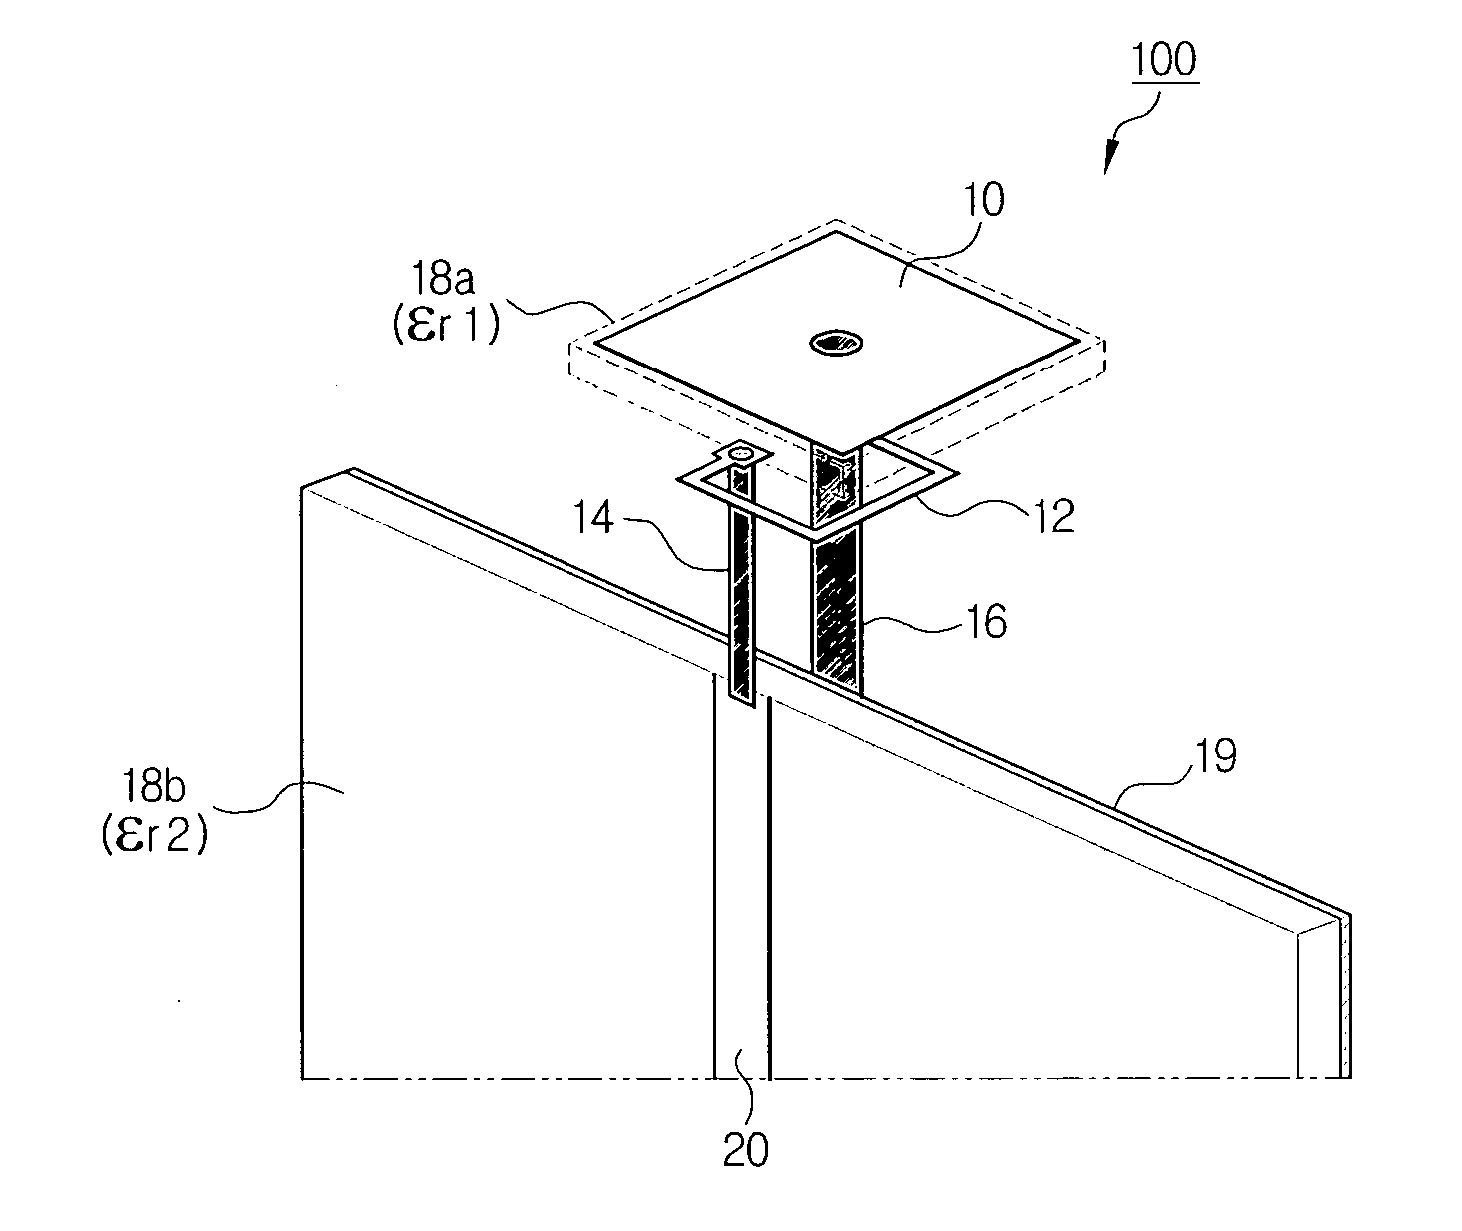 Small broadband monopole antenna having perpendicular ground plane with electromagnetically coupled feed